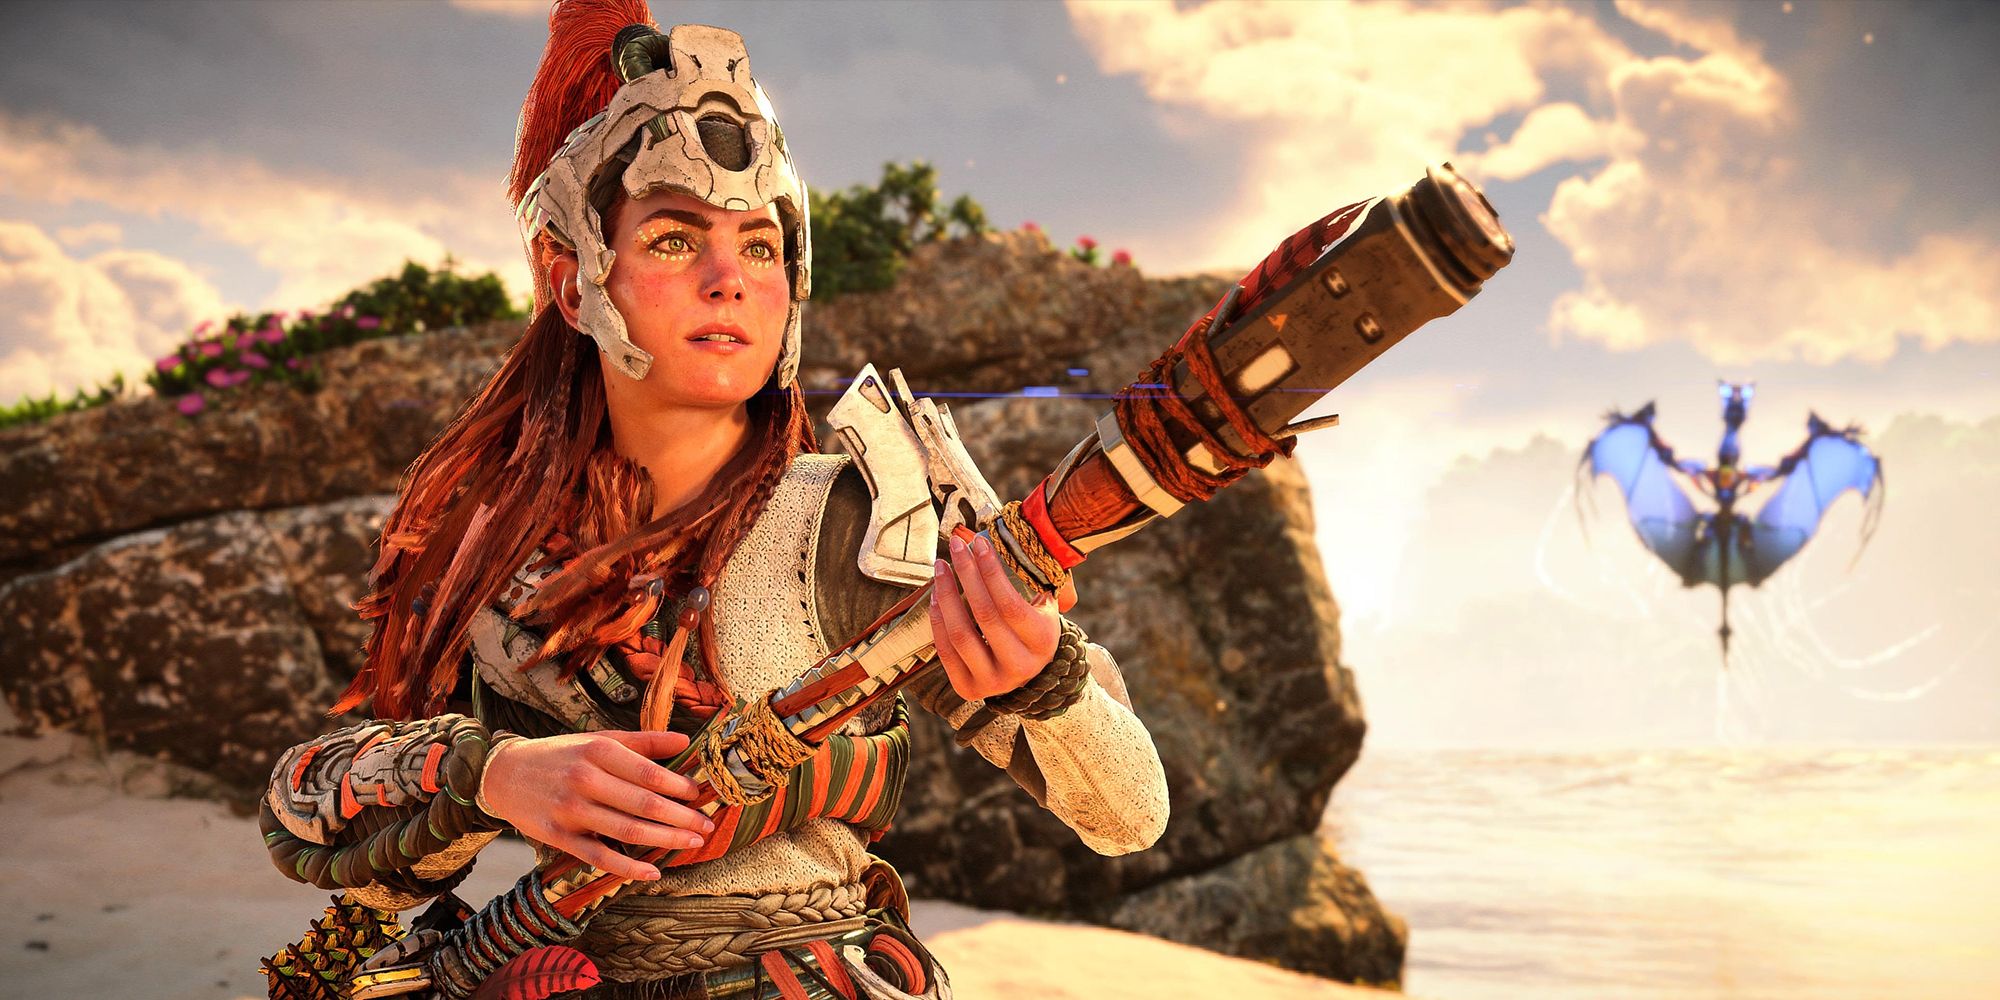 Aloy holding spear with Waterwing in the background on a beach